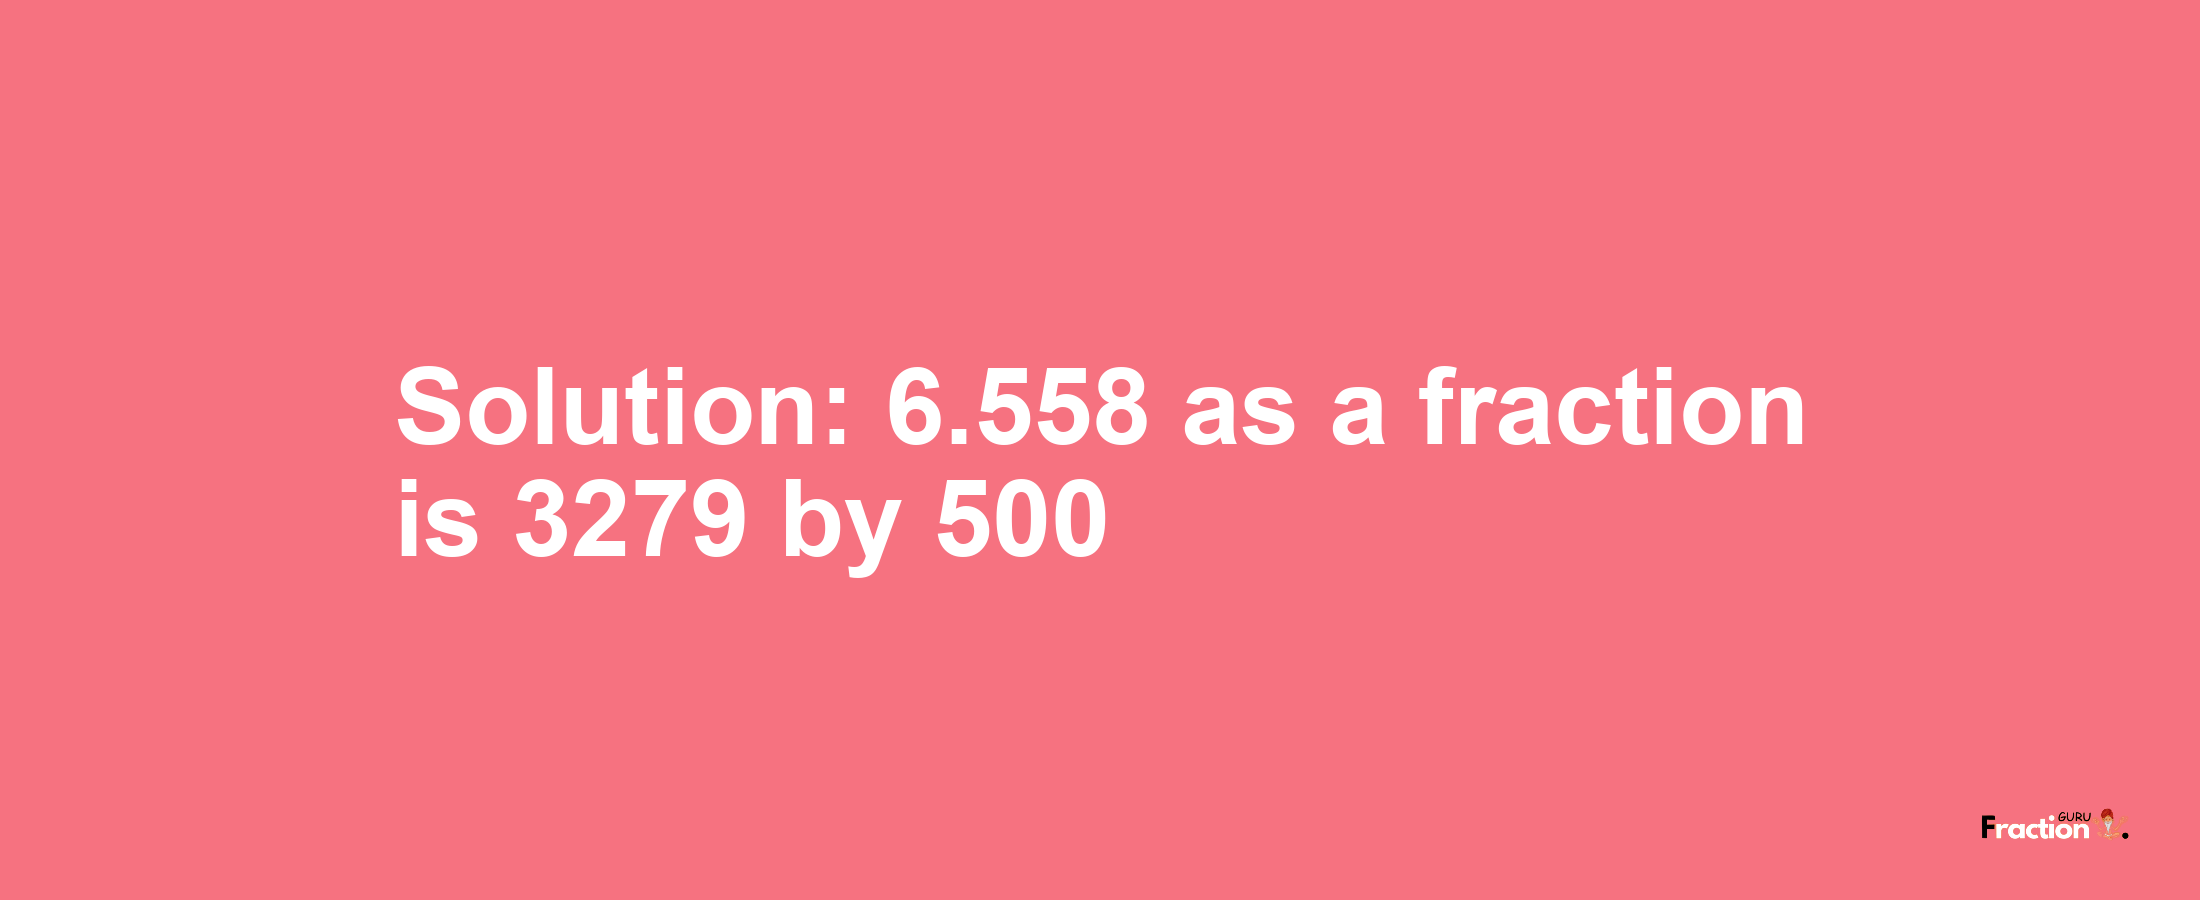 Solution:6.558 as a fraction is 3279/500